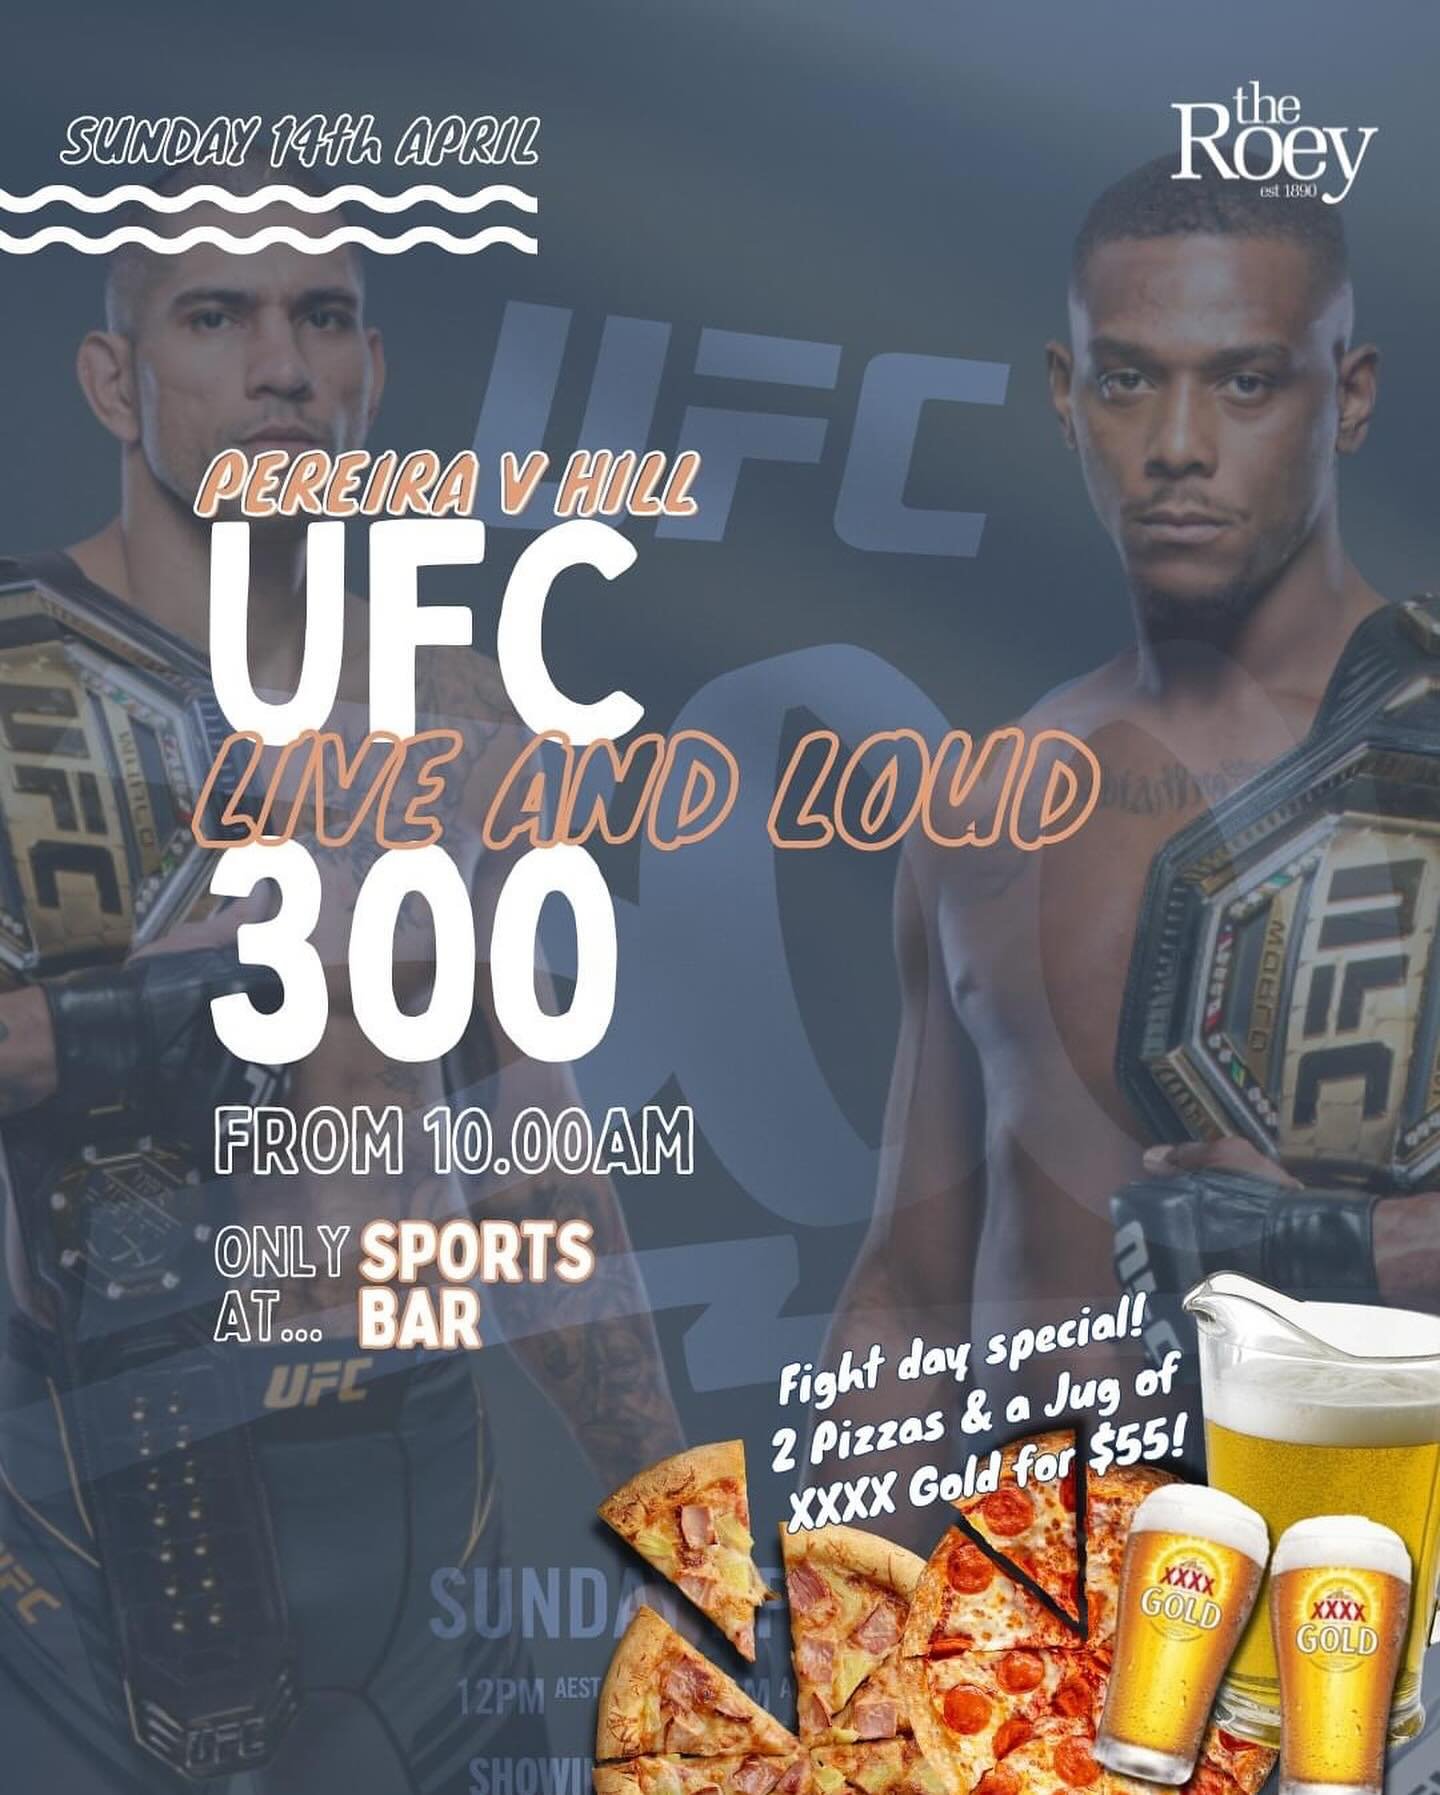 Our HUGE Sunday of SPORTS starts from 10am 💥

First up it&rsquo;s UFC 300 🥊Pereira vs Hill🥊 live &amp; loud on the big screens in the Sports Bar, fights start 10am sharp!

Then SUNDAY FOOTY kicks off 👇🏽🏉

AFL - Cats vs Roos 11.00am
Eagles vs Ti